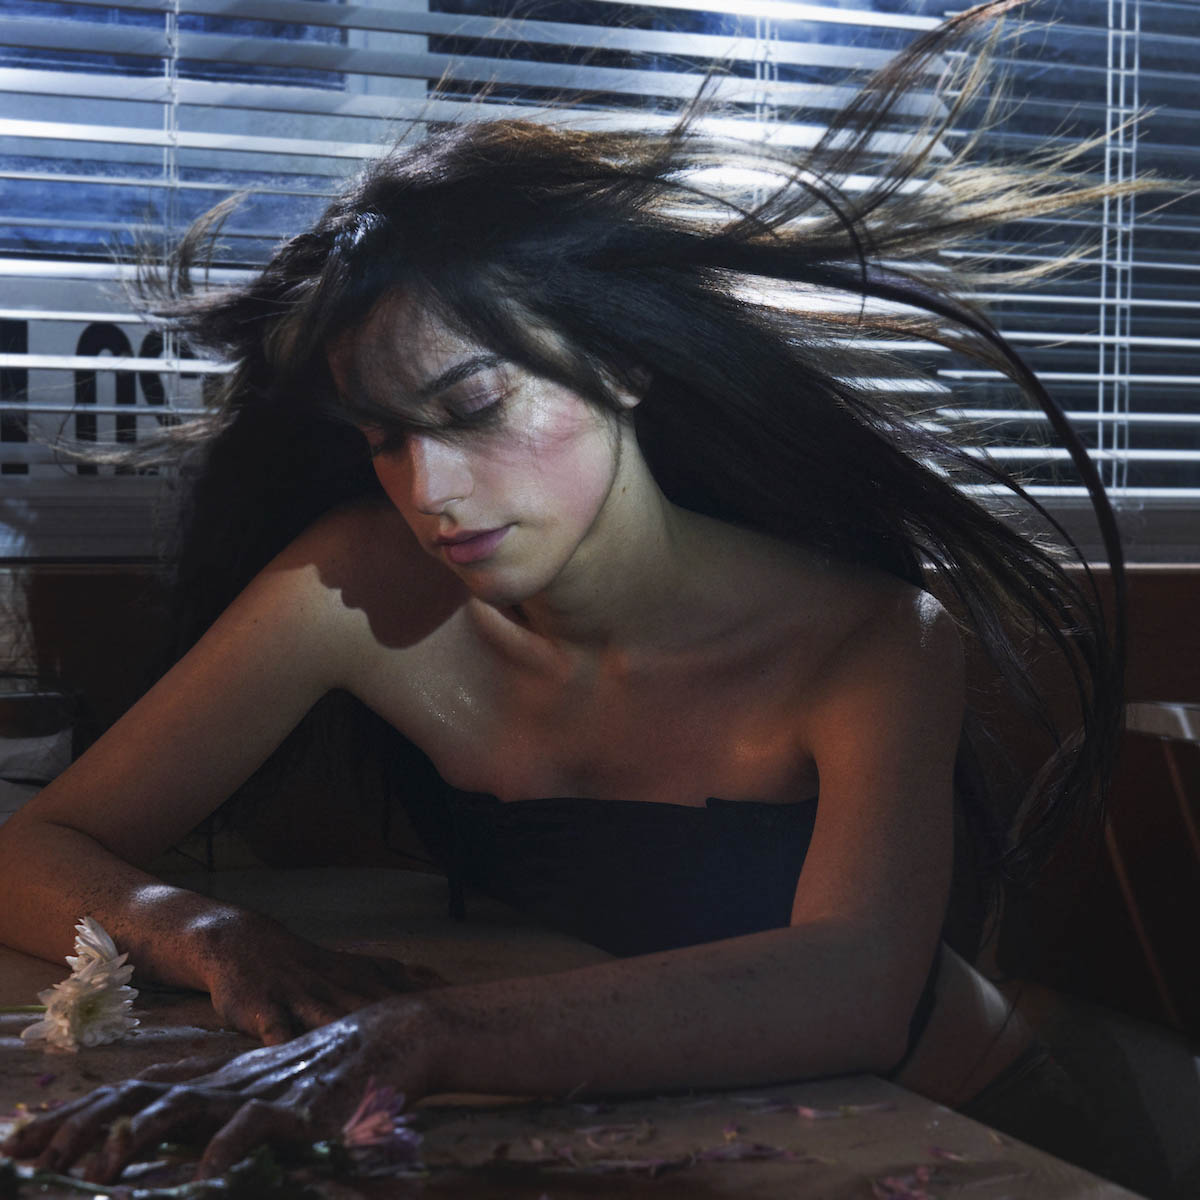 White woman with long brown hair, that's flying in the air, is sitting at a table with her fingertips clawed into the tabletop. She is looking at the table. She is wearing a black top, her shoulders are bare. A half-open blind can be seen behind her. It’s dark outside.